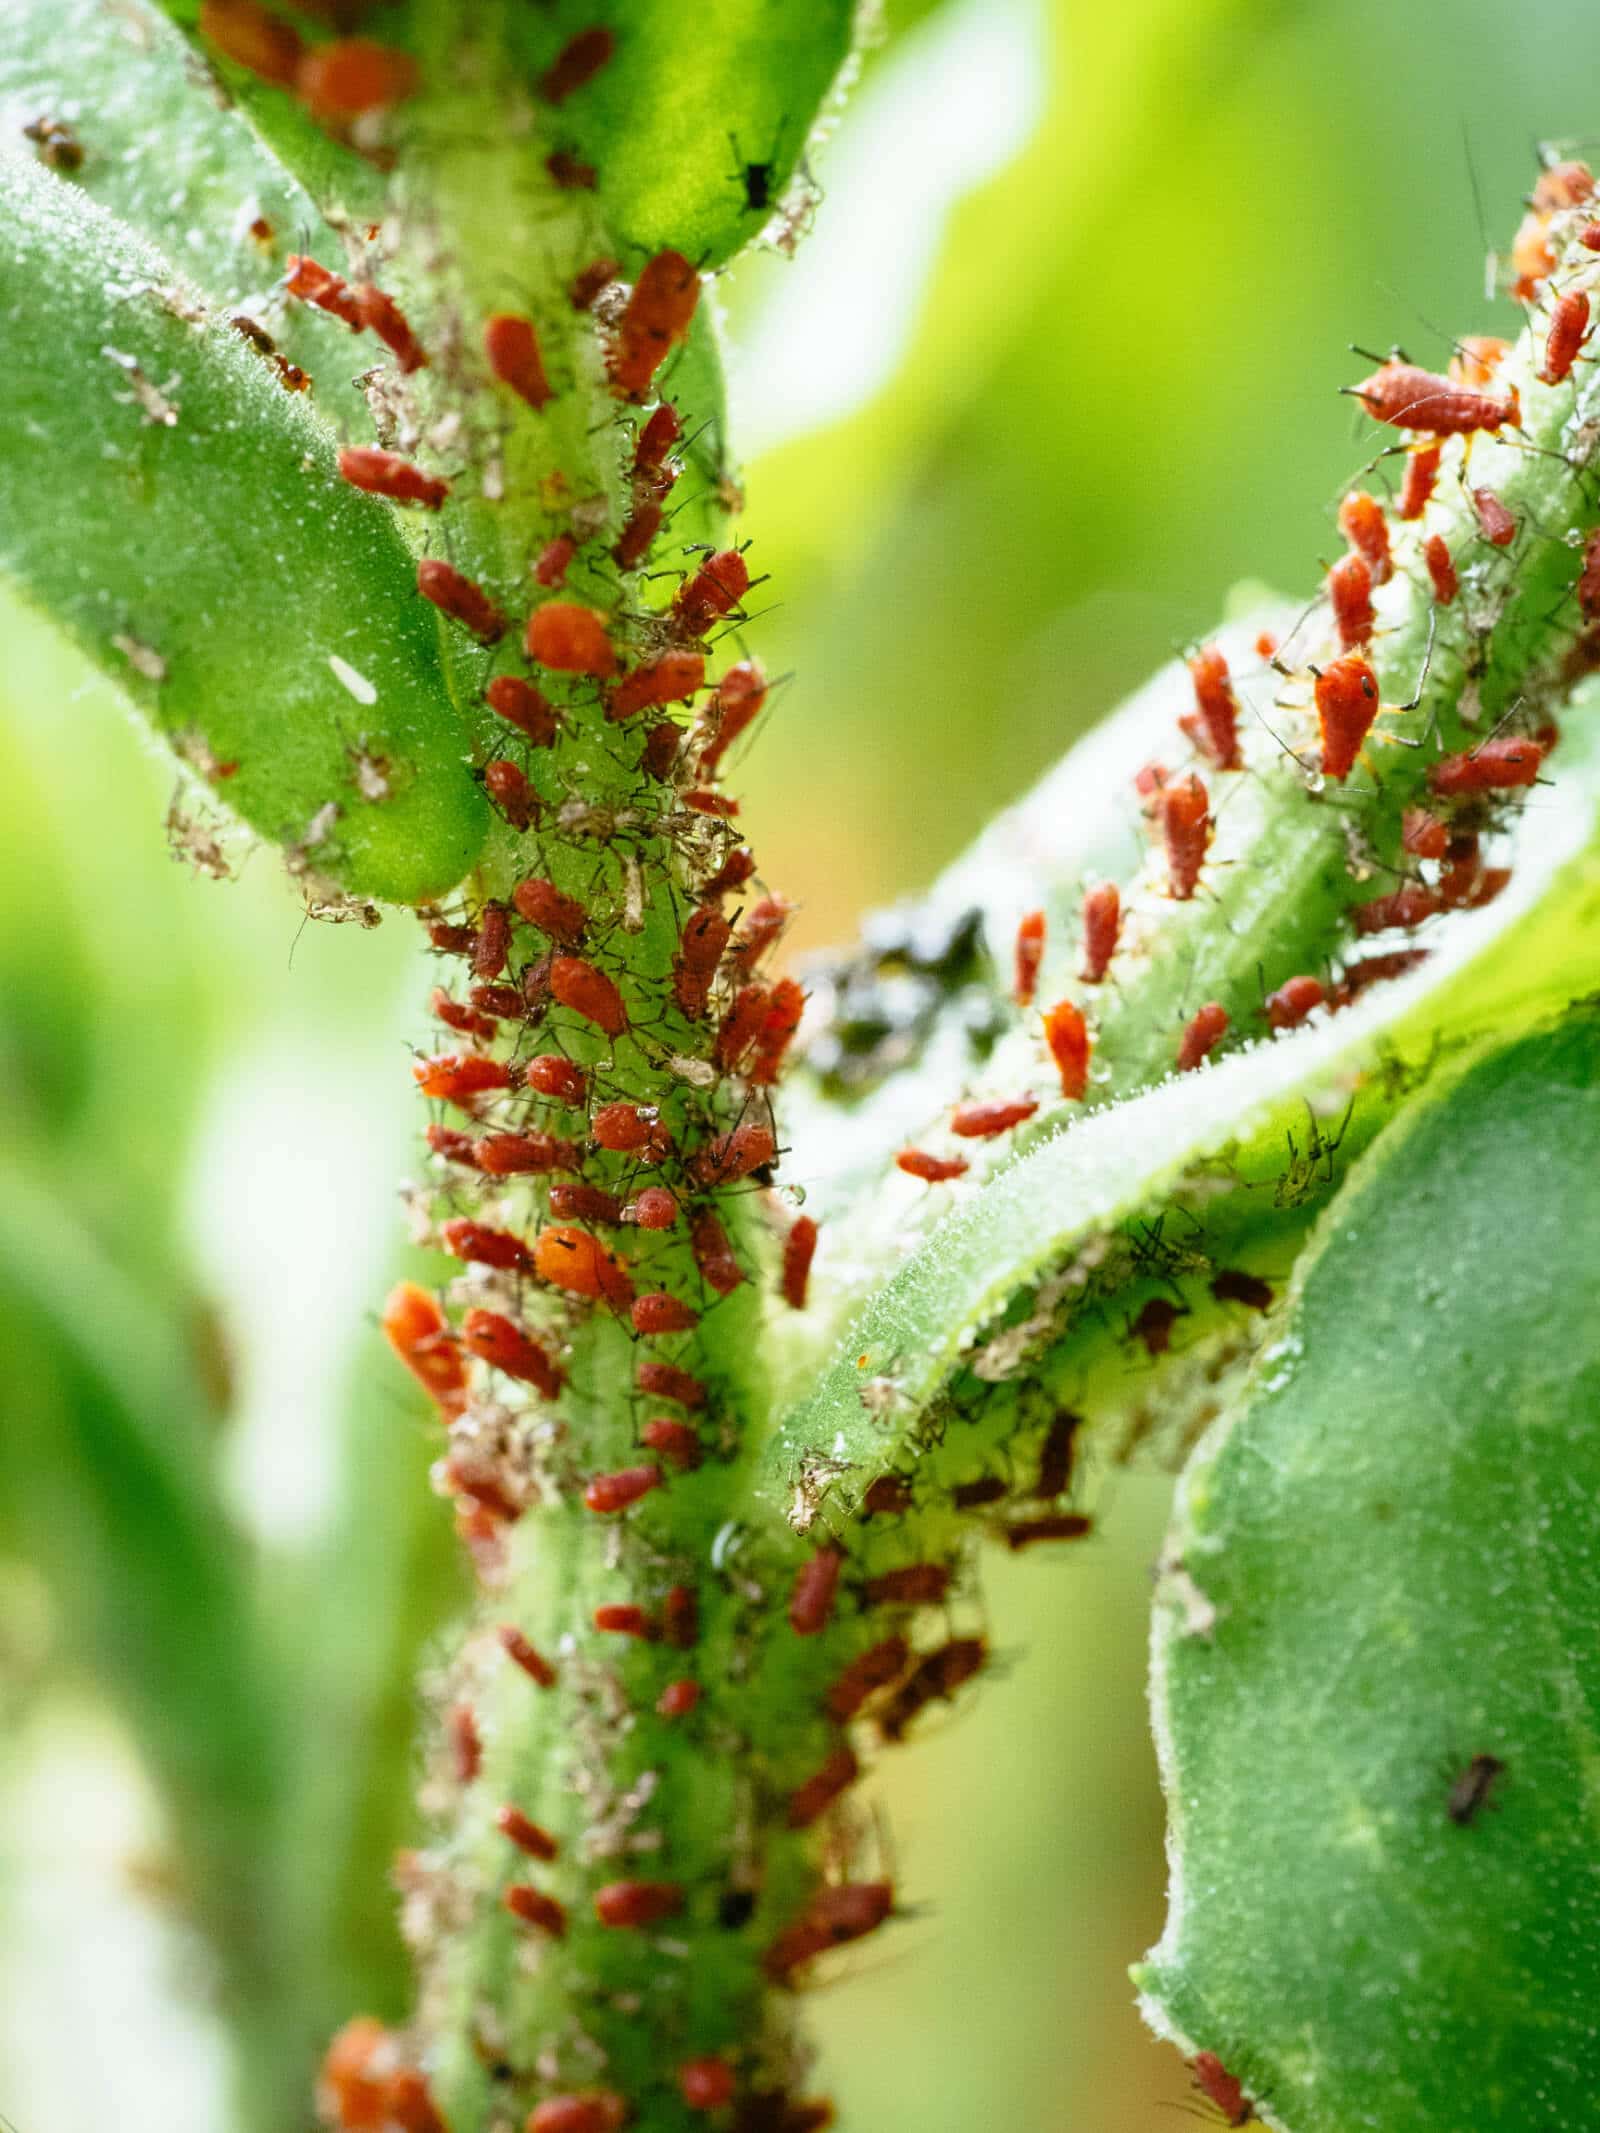 Organic pest control 101: 7 easy solutions for getting rid of aphids